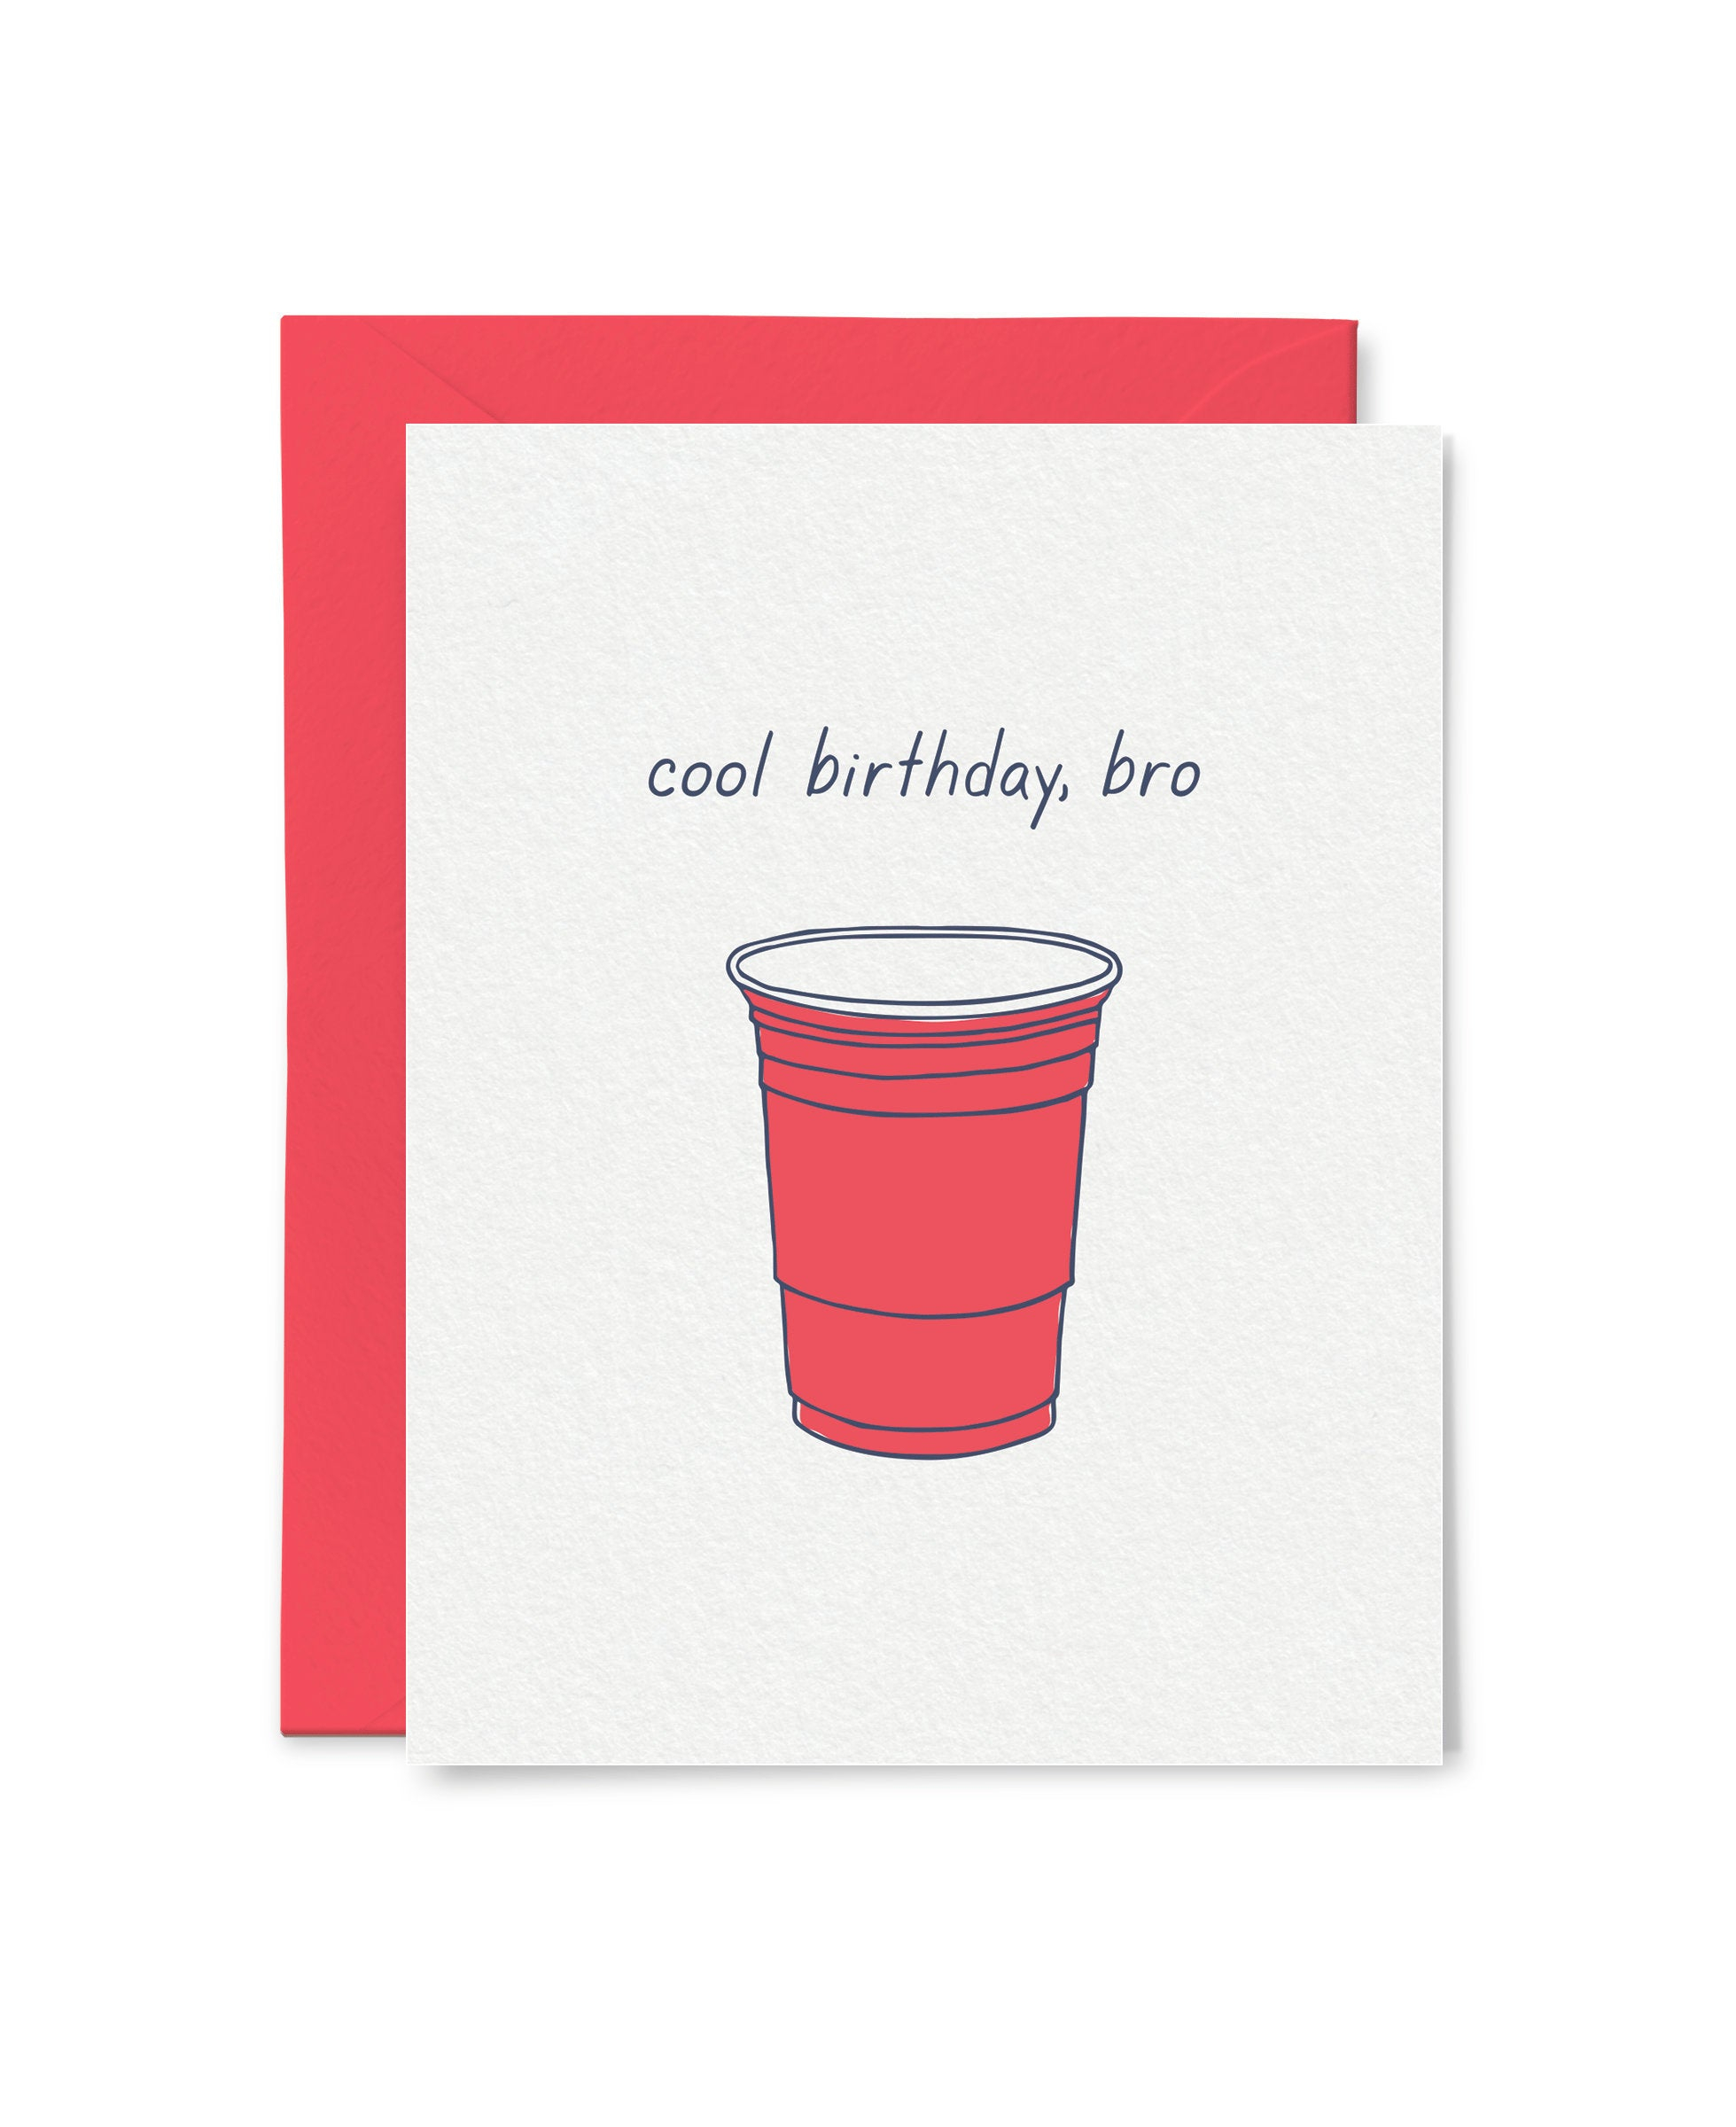 Funny Ideas For Birthday Cards Cool Birthday Bro Birthday Card Funny Birthday Card Best Friend Birthday Snarky Birthday Card Boyfriend Birthday Card Card For Him